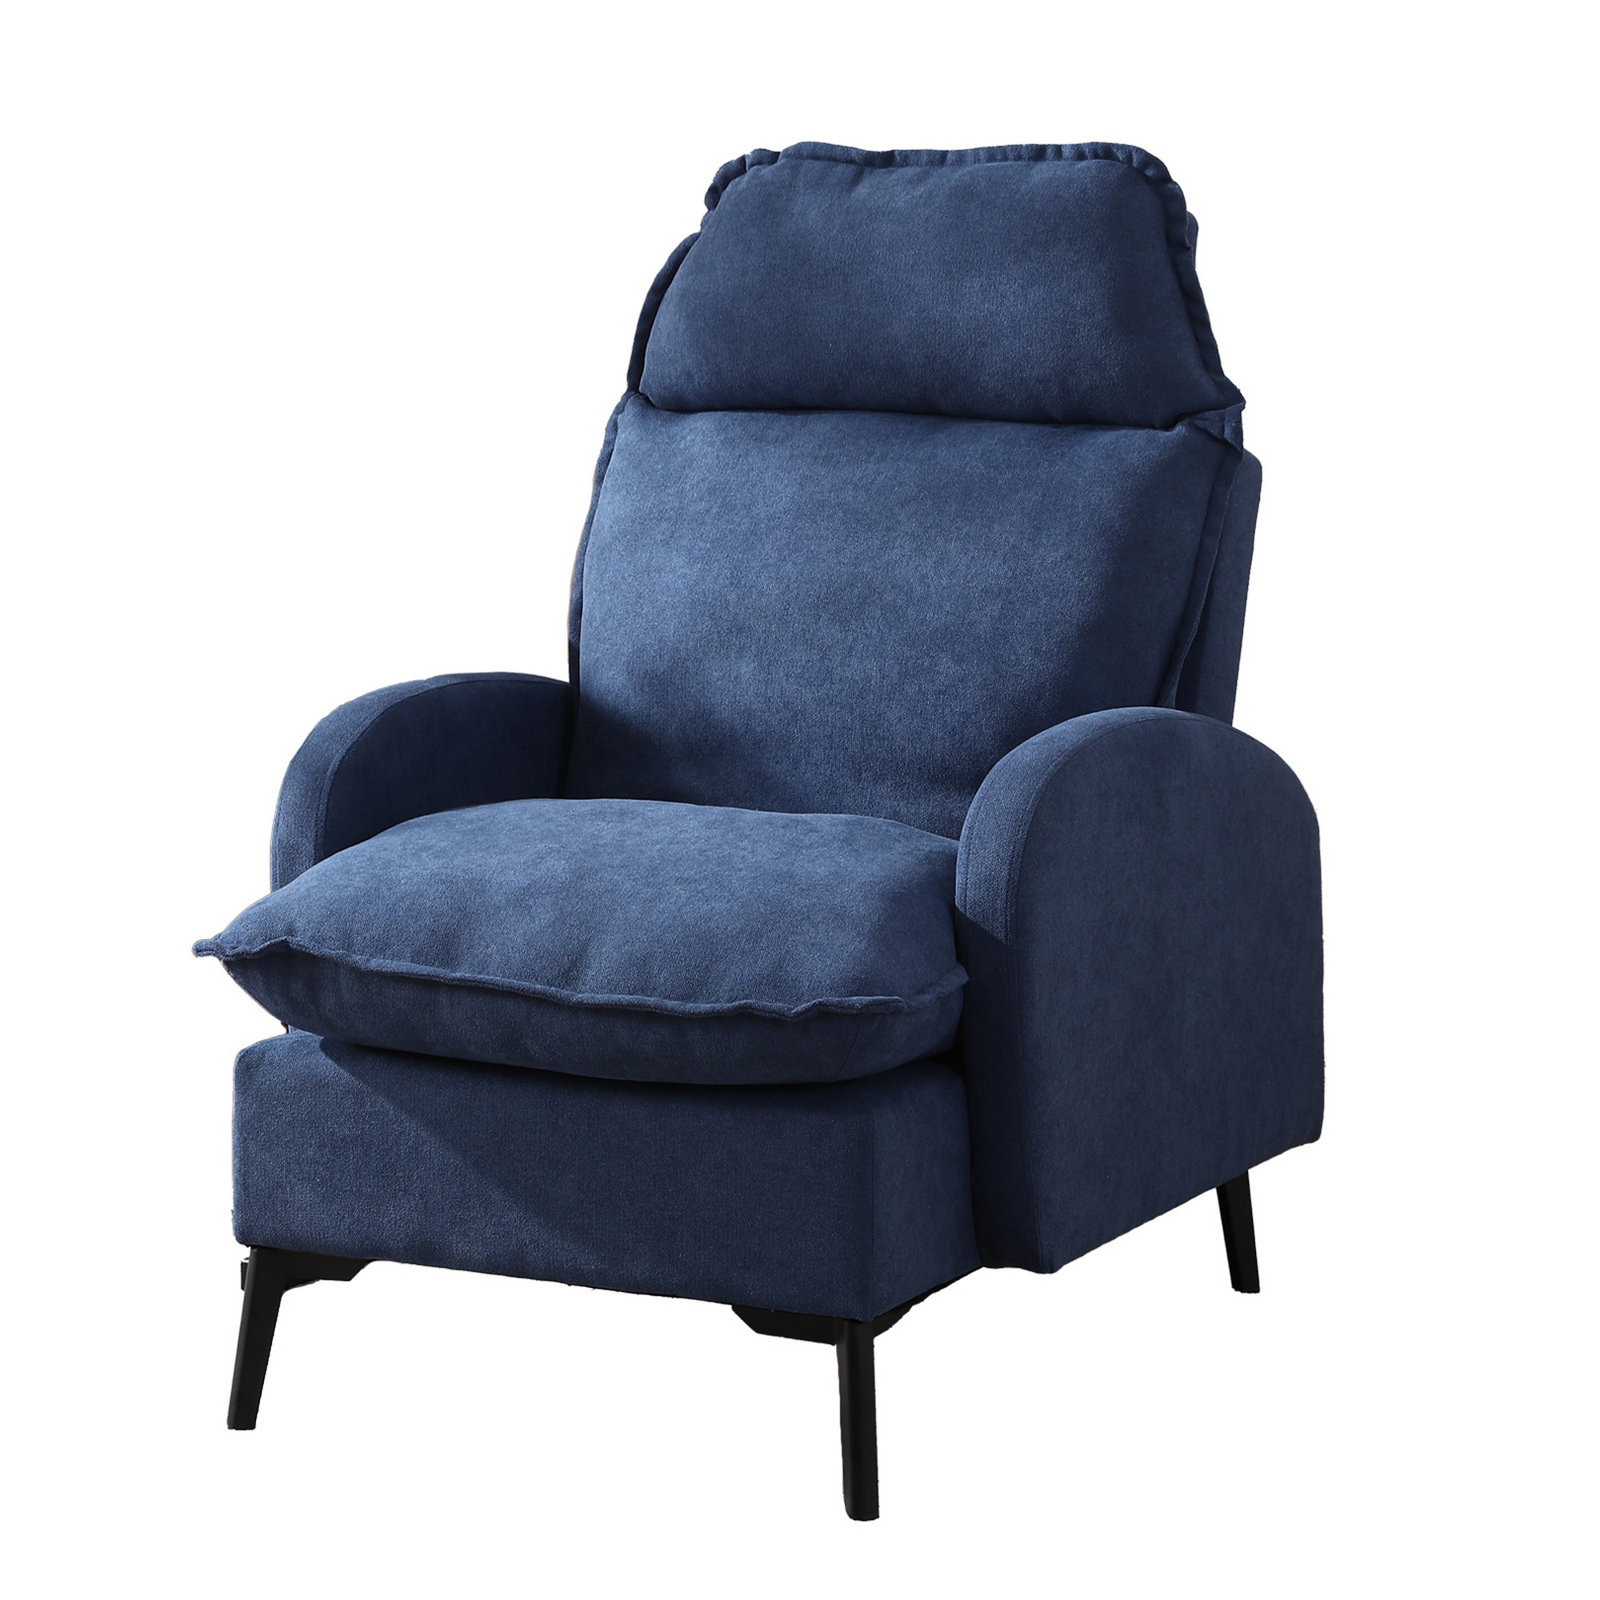 Infinity Upholstered Recliner with Ottoman